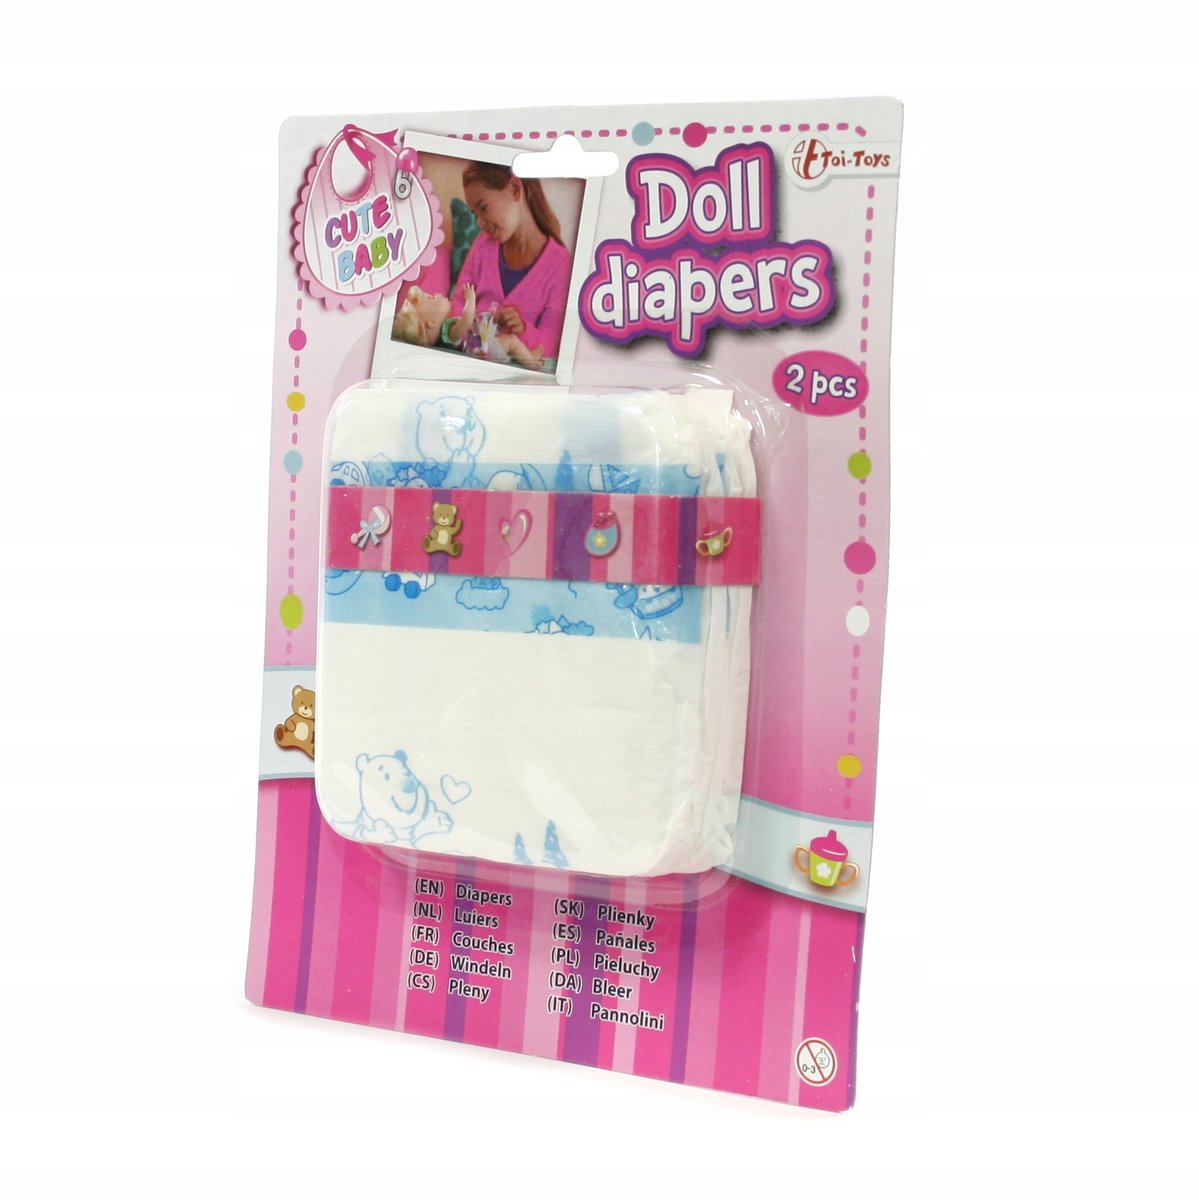 dcp-j4110dw service pampers